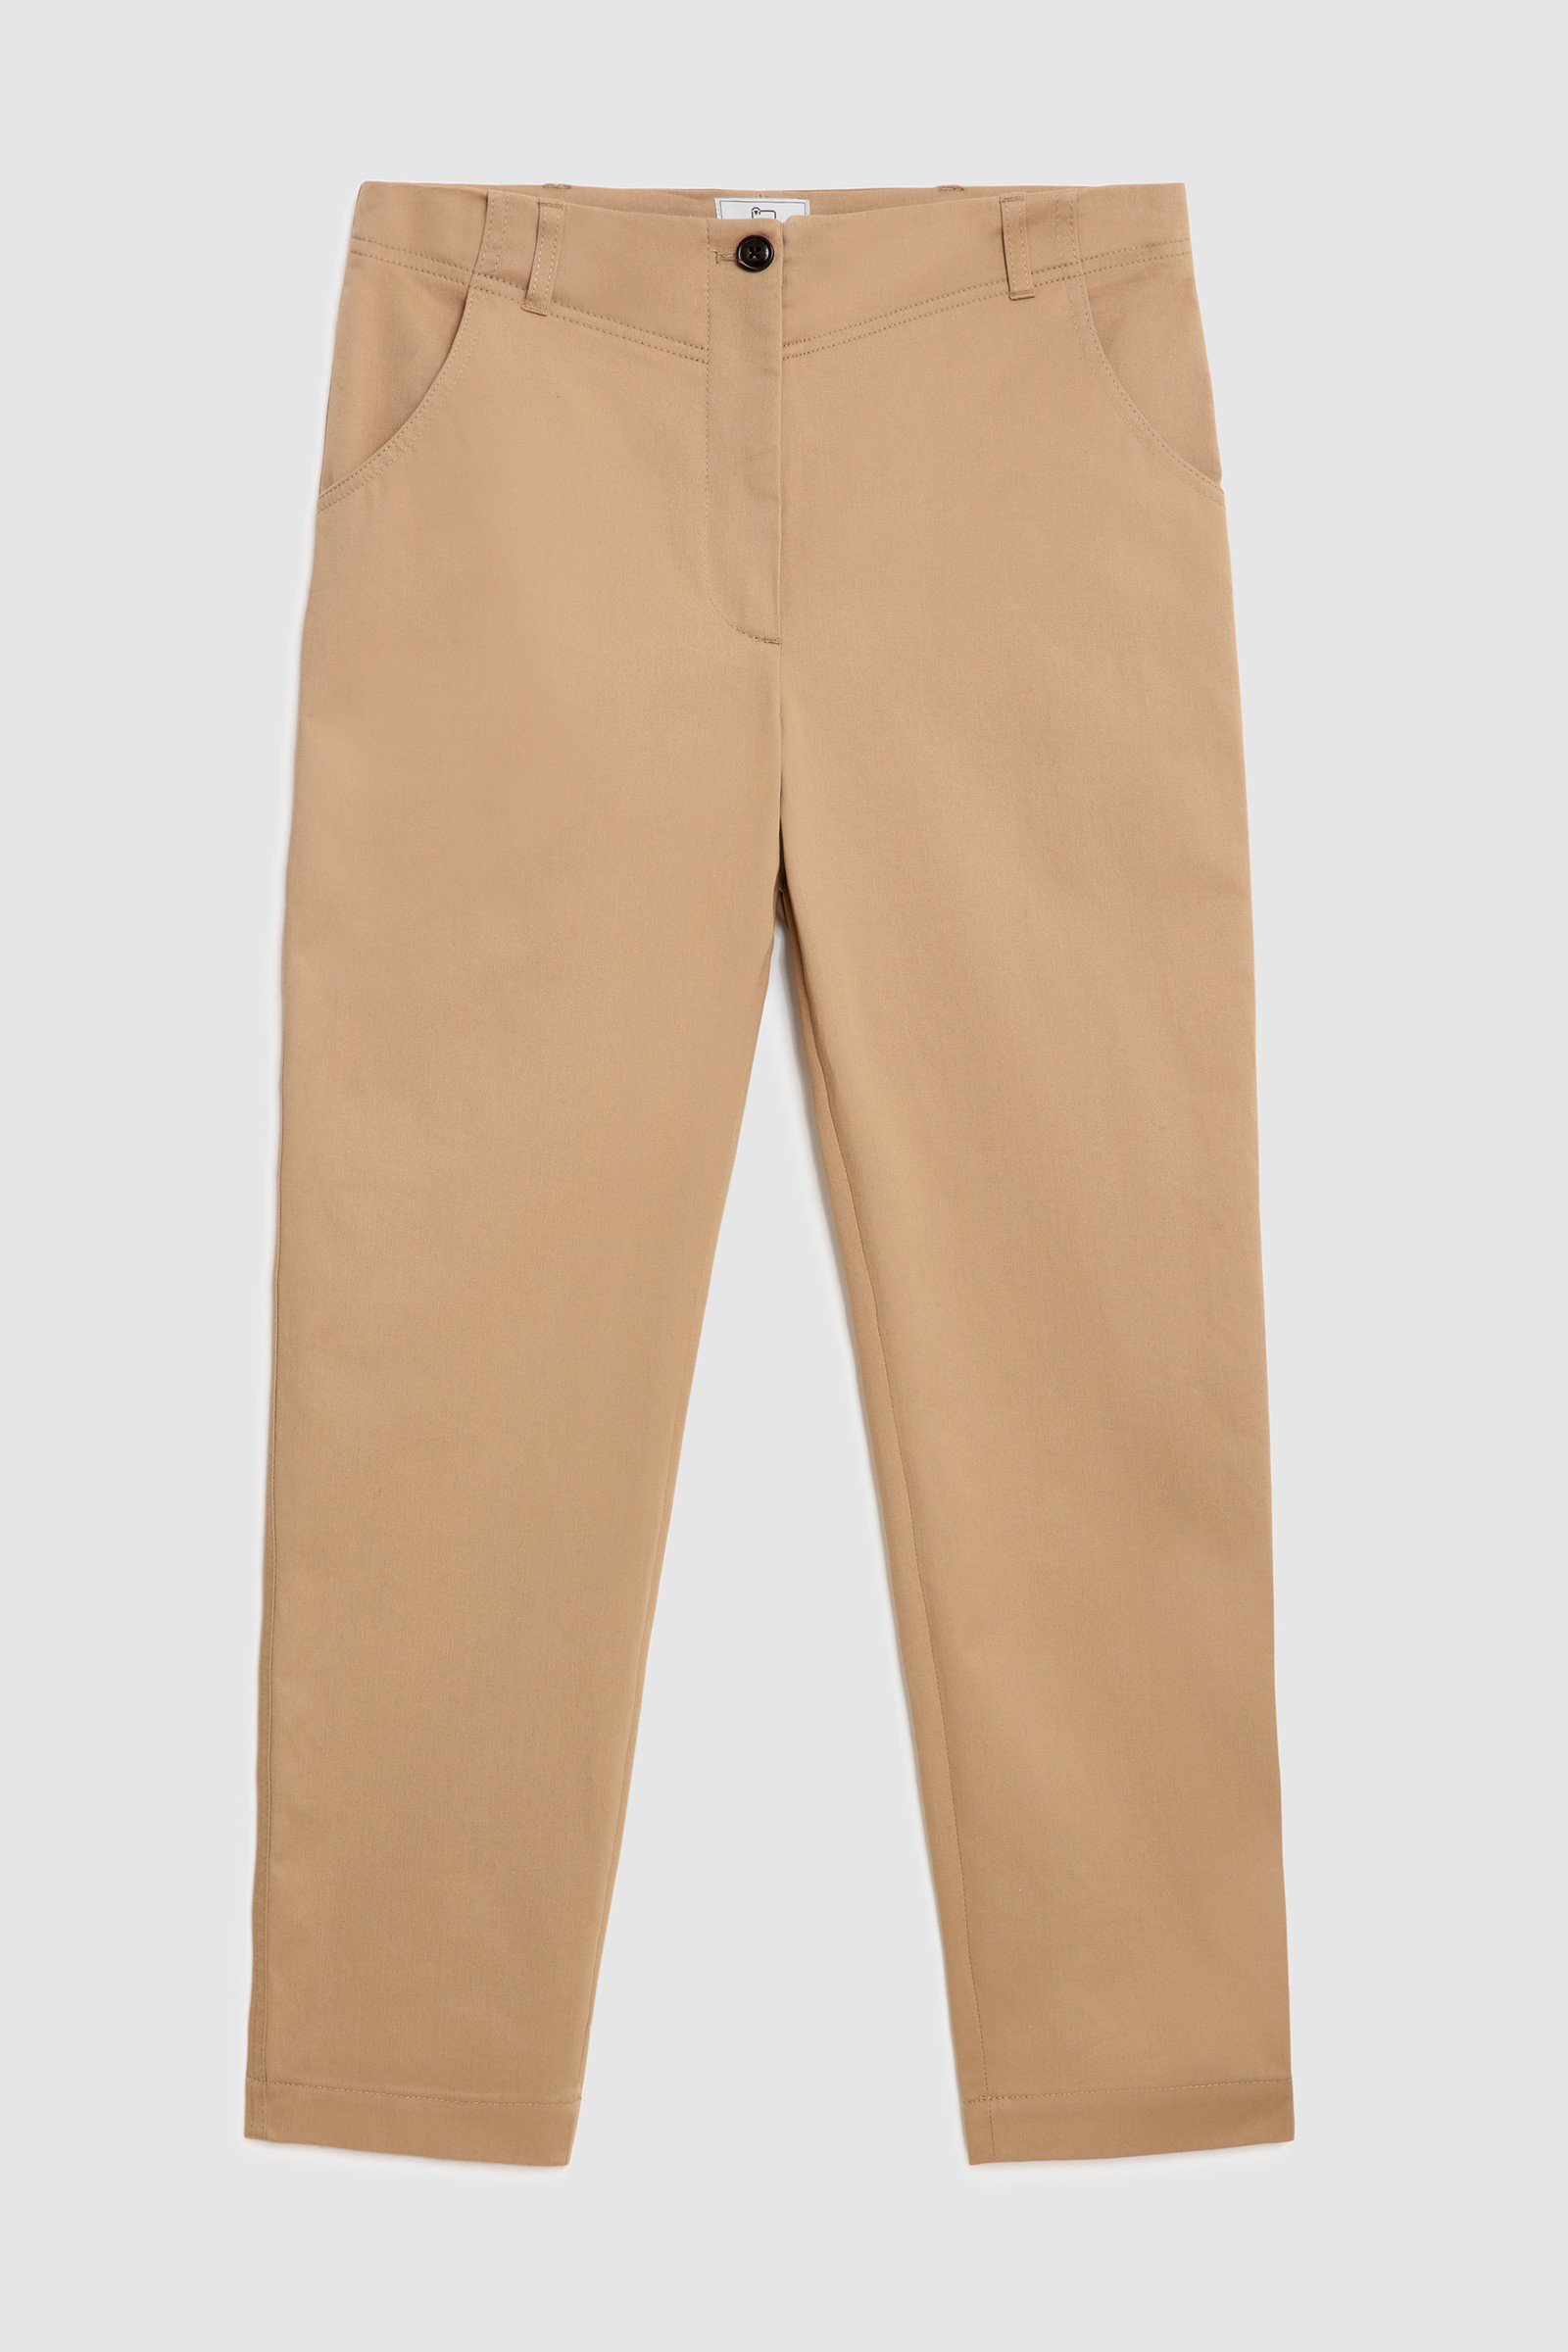 Slacks and Chinos Black Slacks and Chinos Woolrich Trousers - Save 33% Womens Trousers Woolrich Womens Pants in Beige 